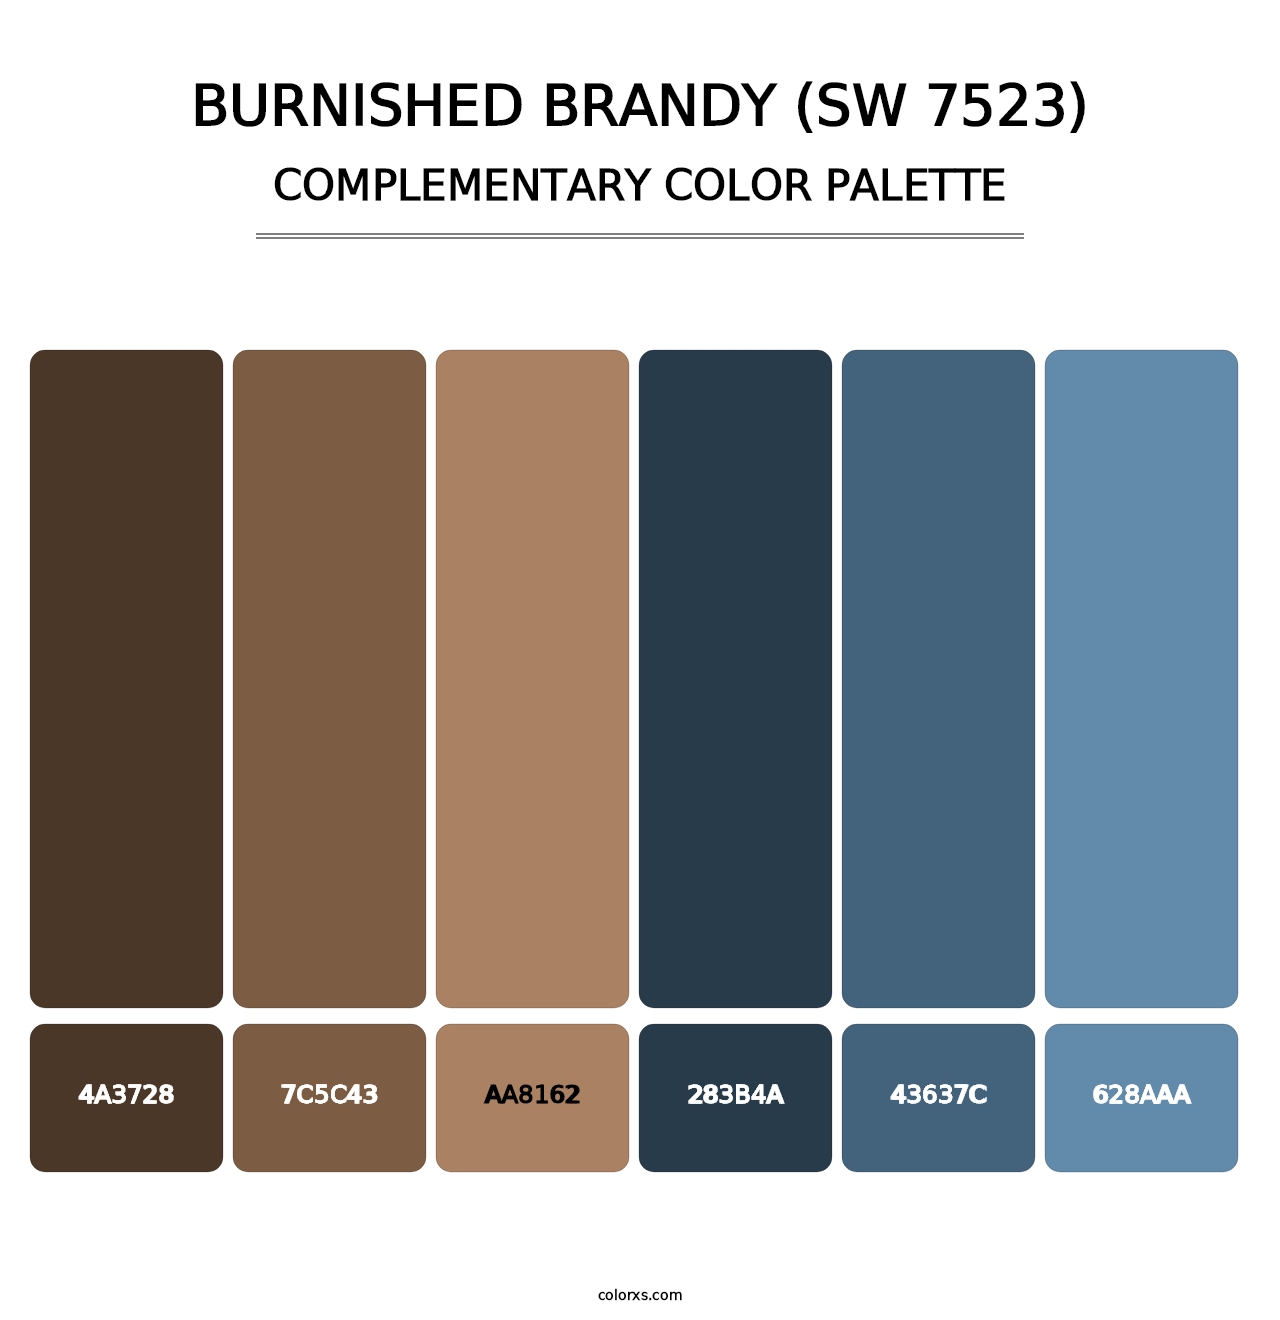 Burnished Brandy (SW 7523) - Complementary Color Palette